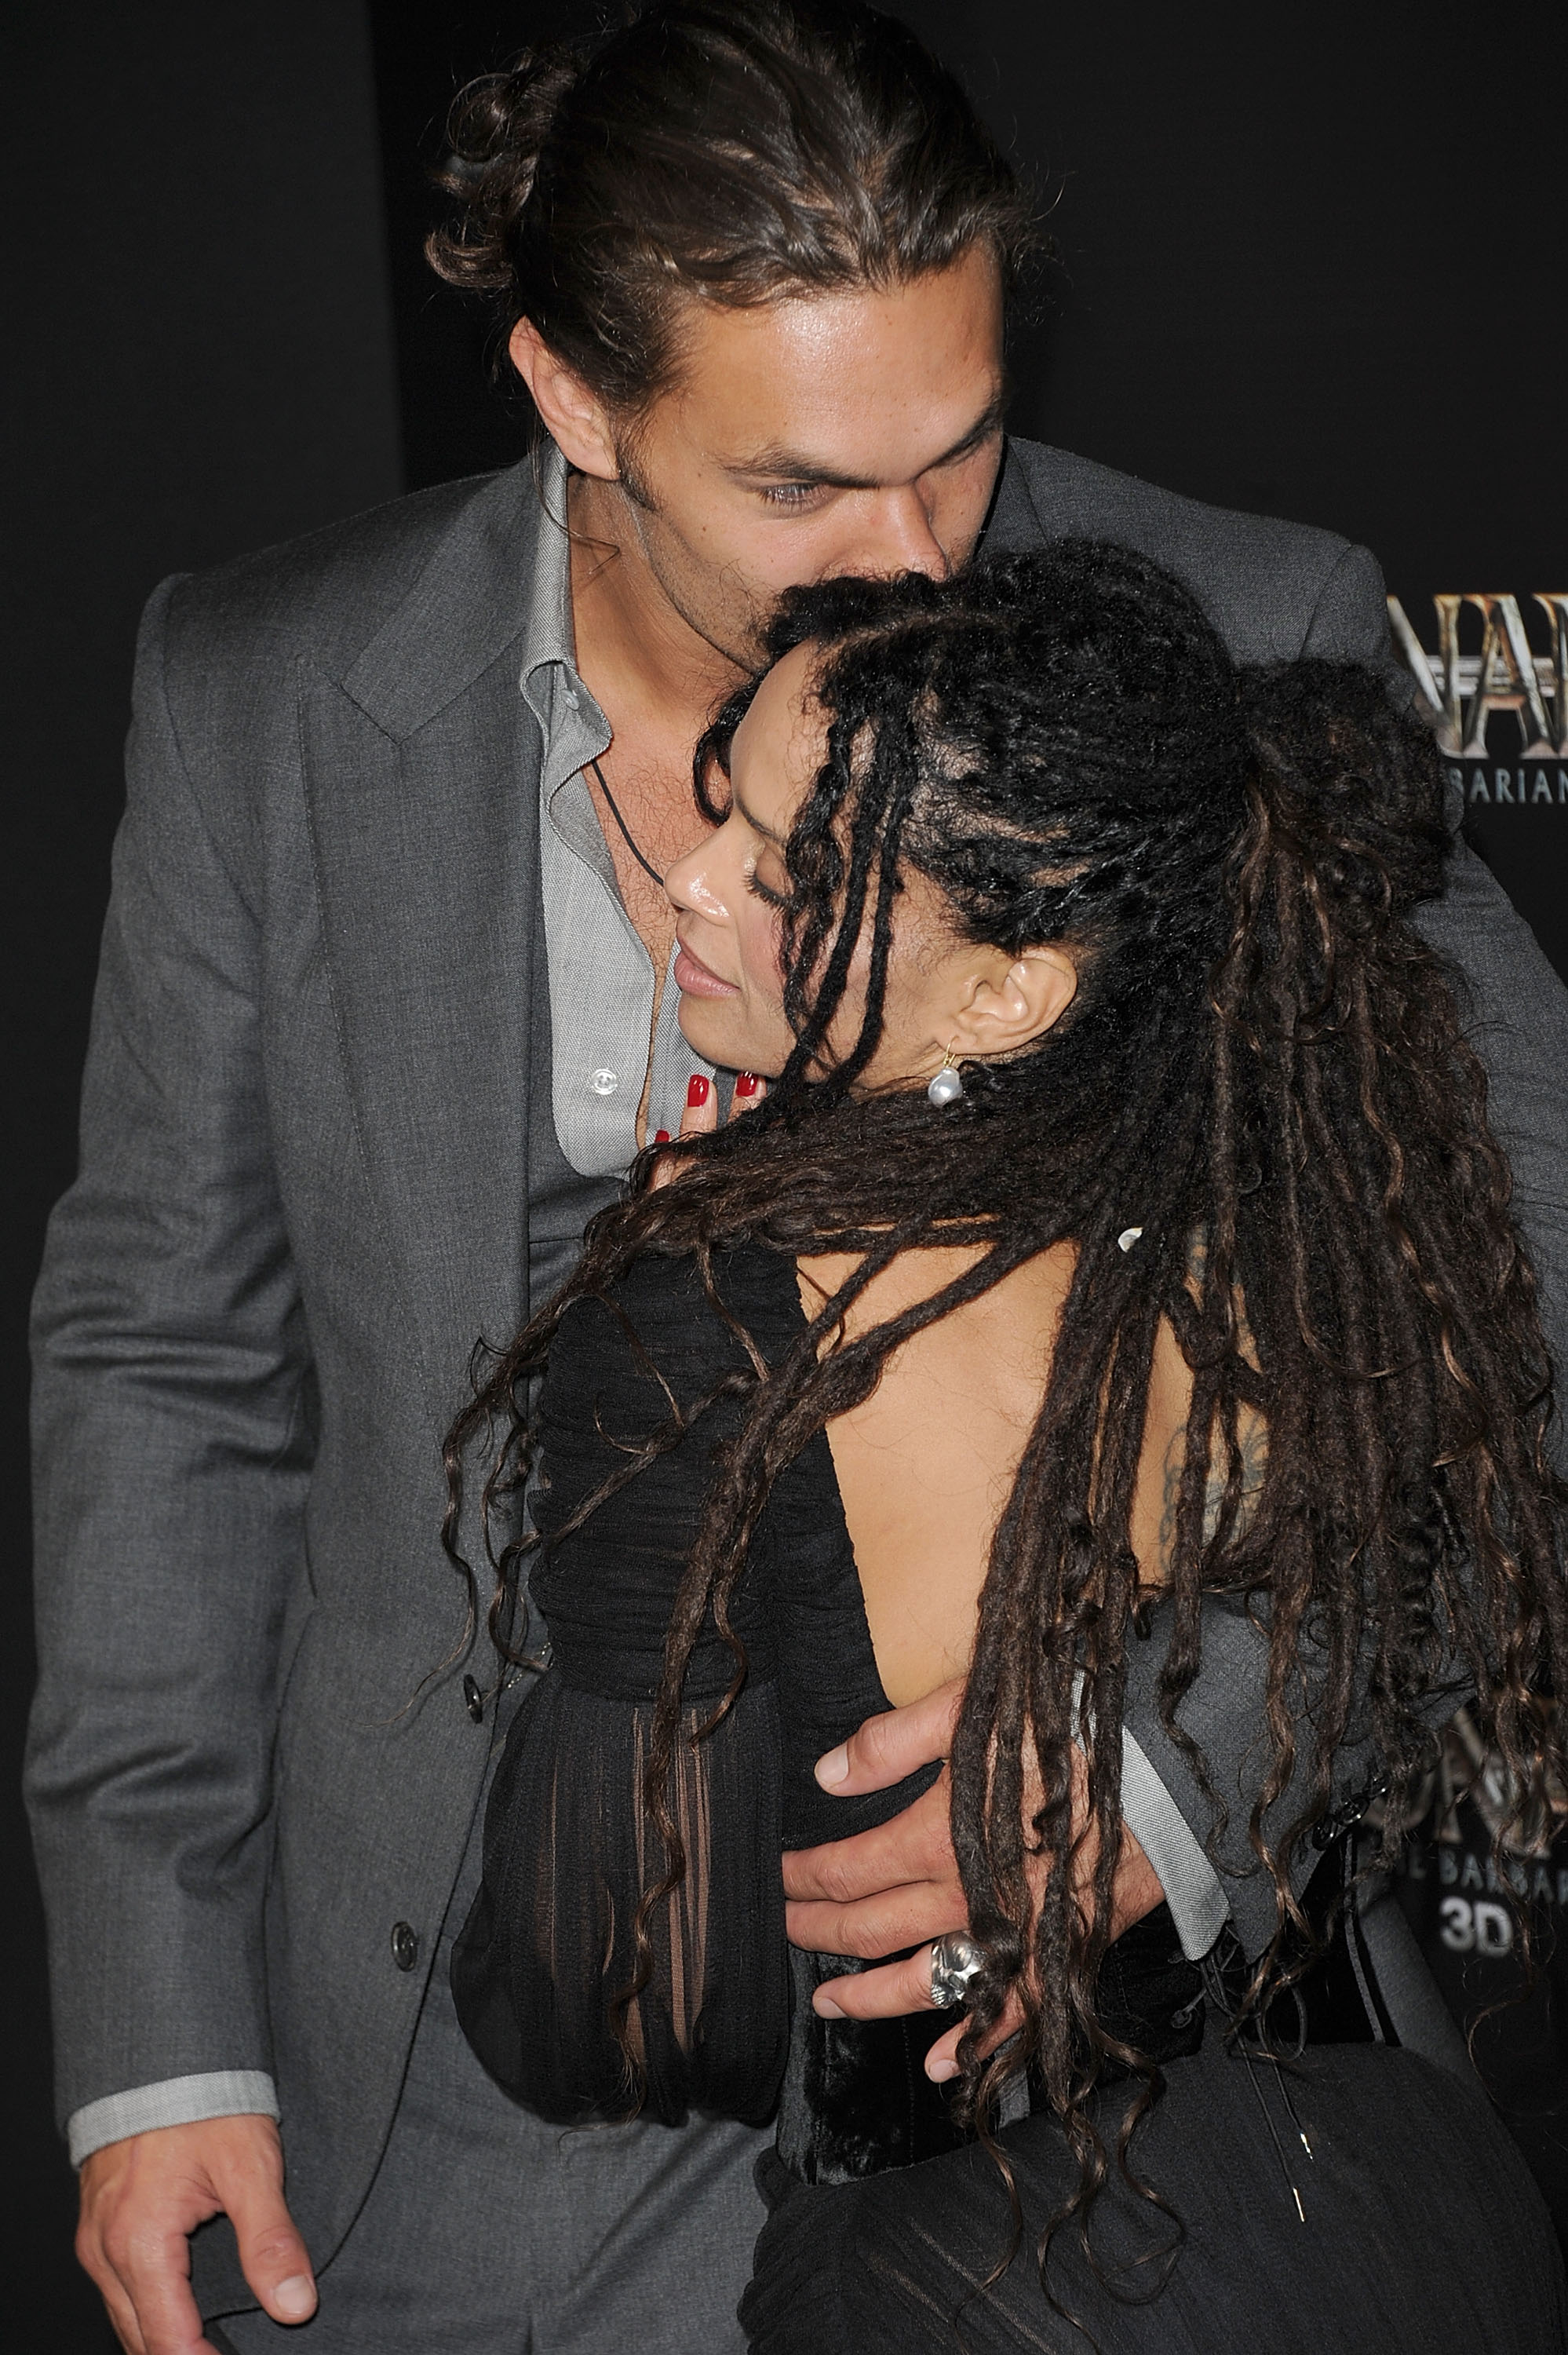 Lisa Bonet and Jason Momoa attend the premiere of "Conan The Barbarian" on August 11, 2011 in Los Angeles, California | Source: Getty Images